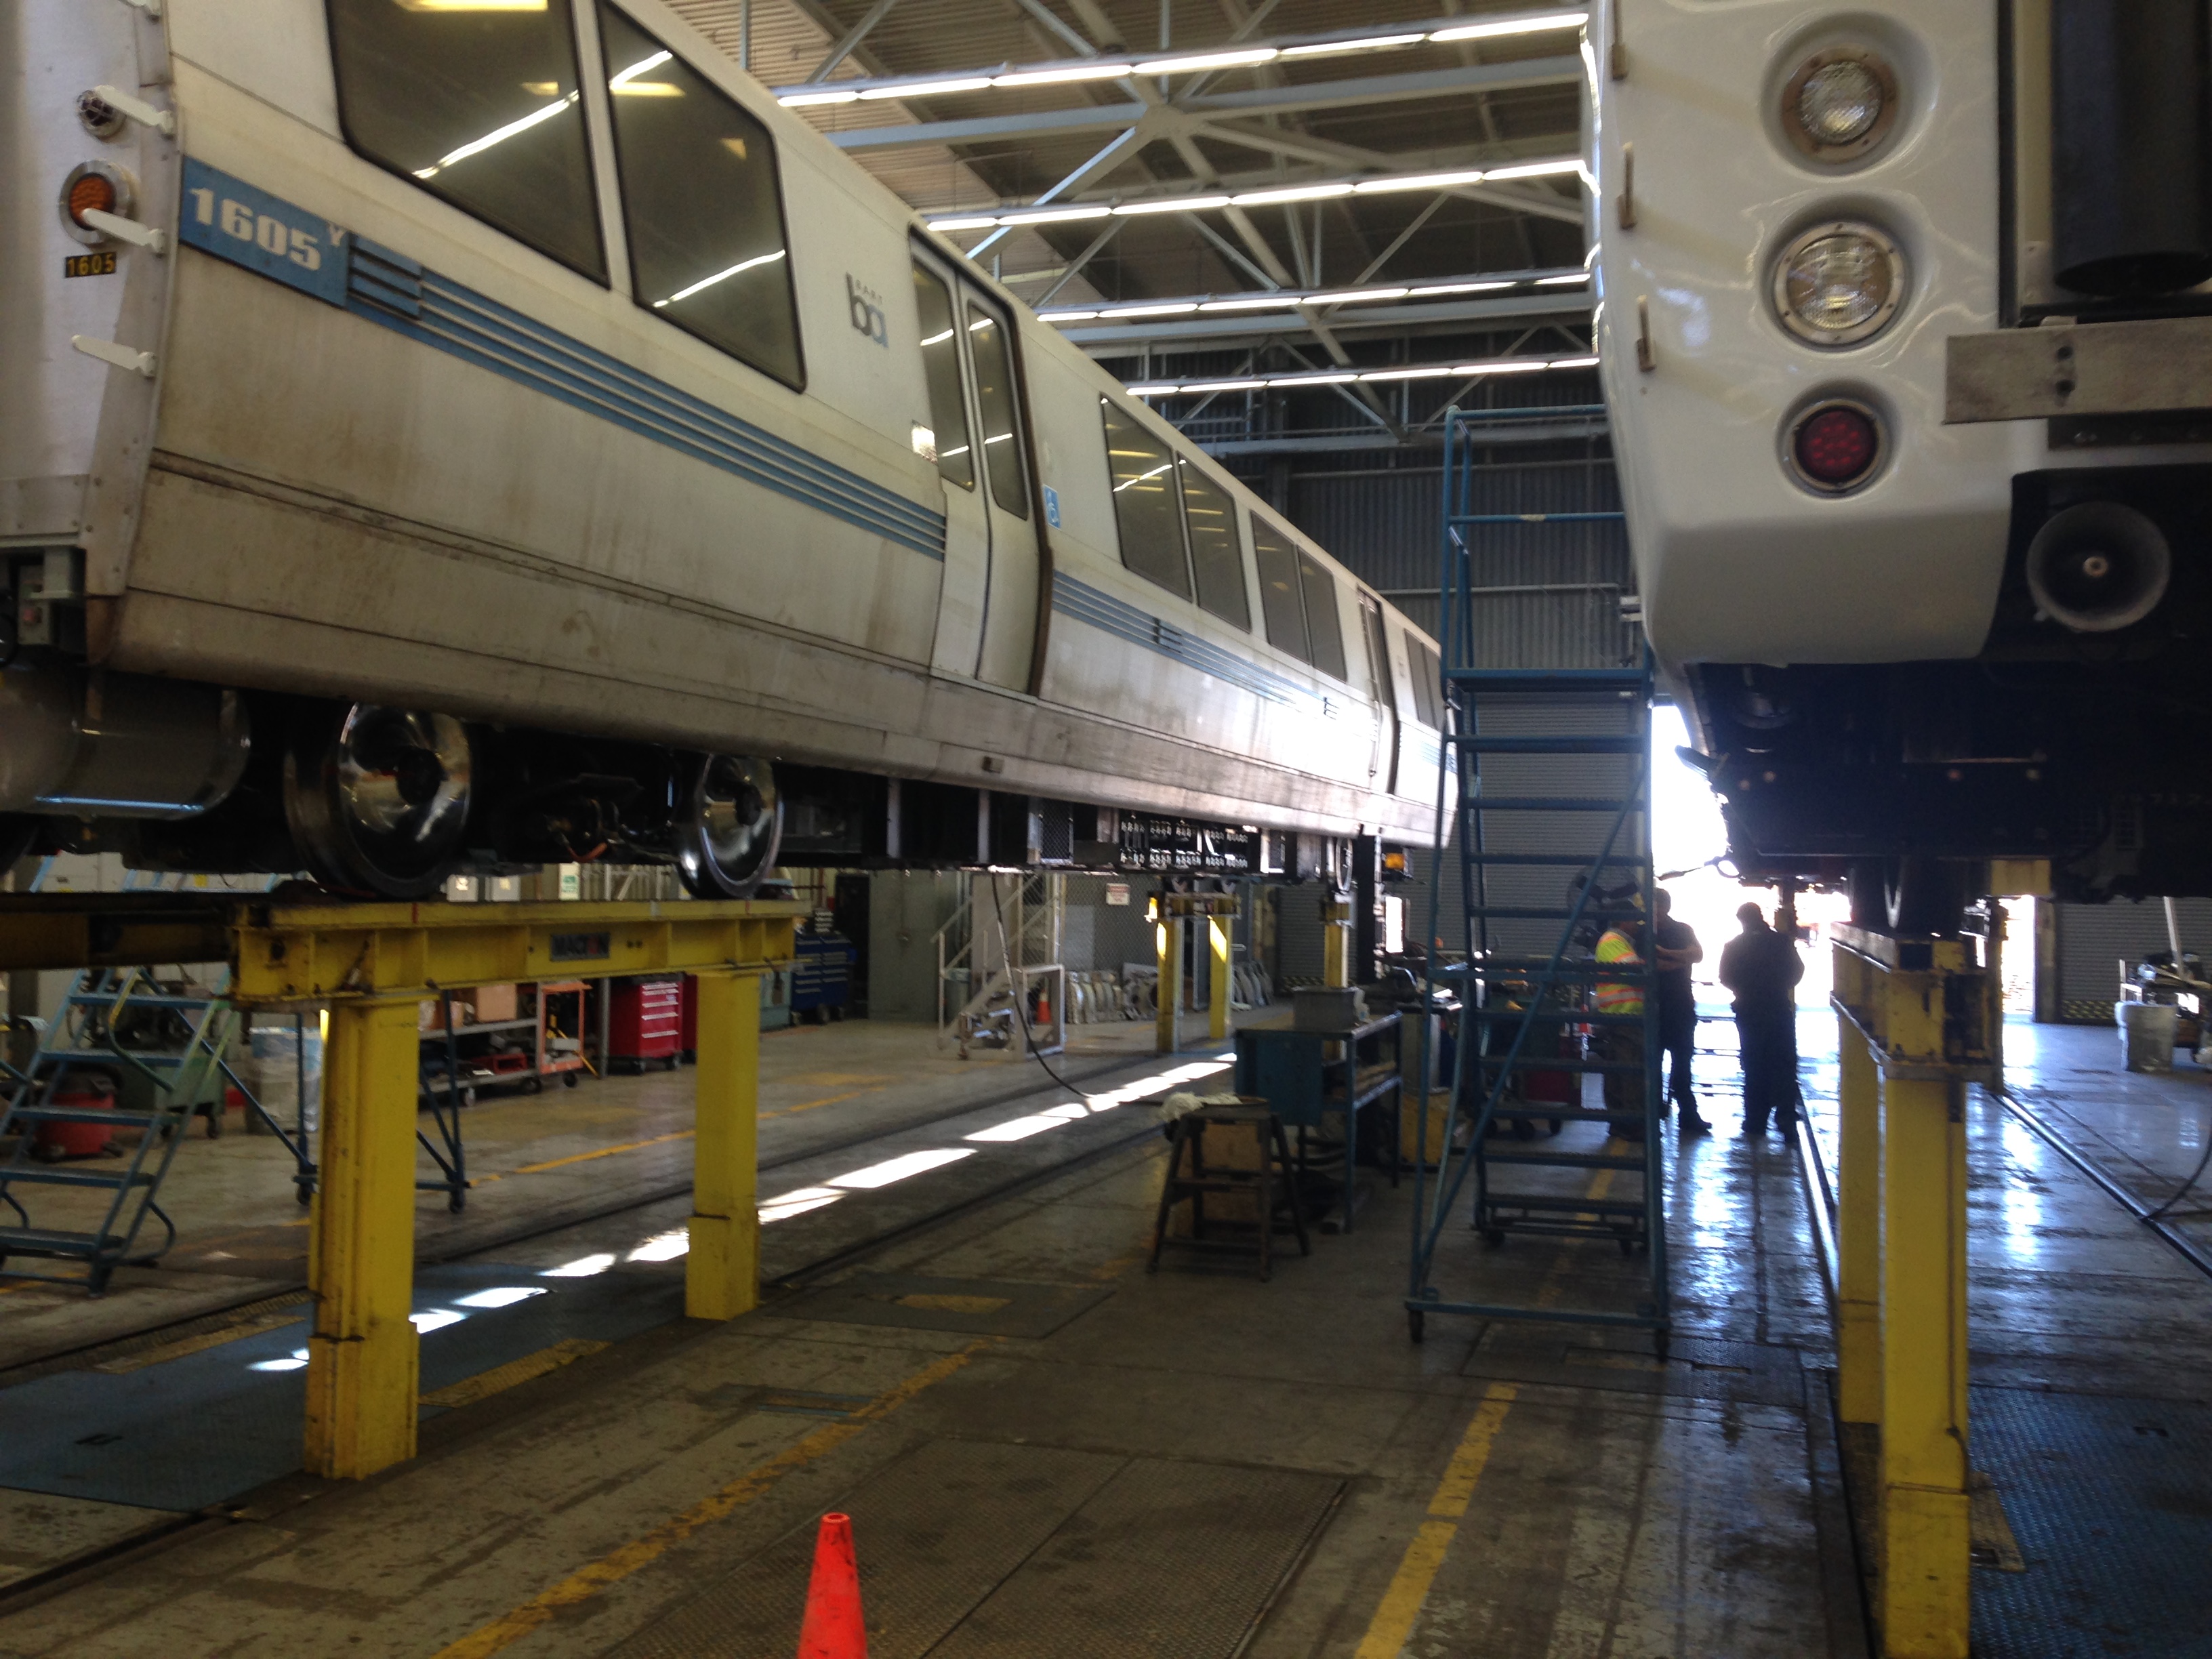 repaired BART trains